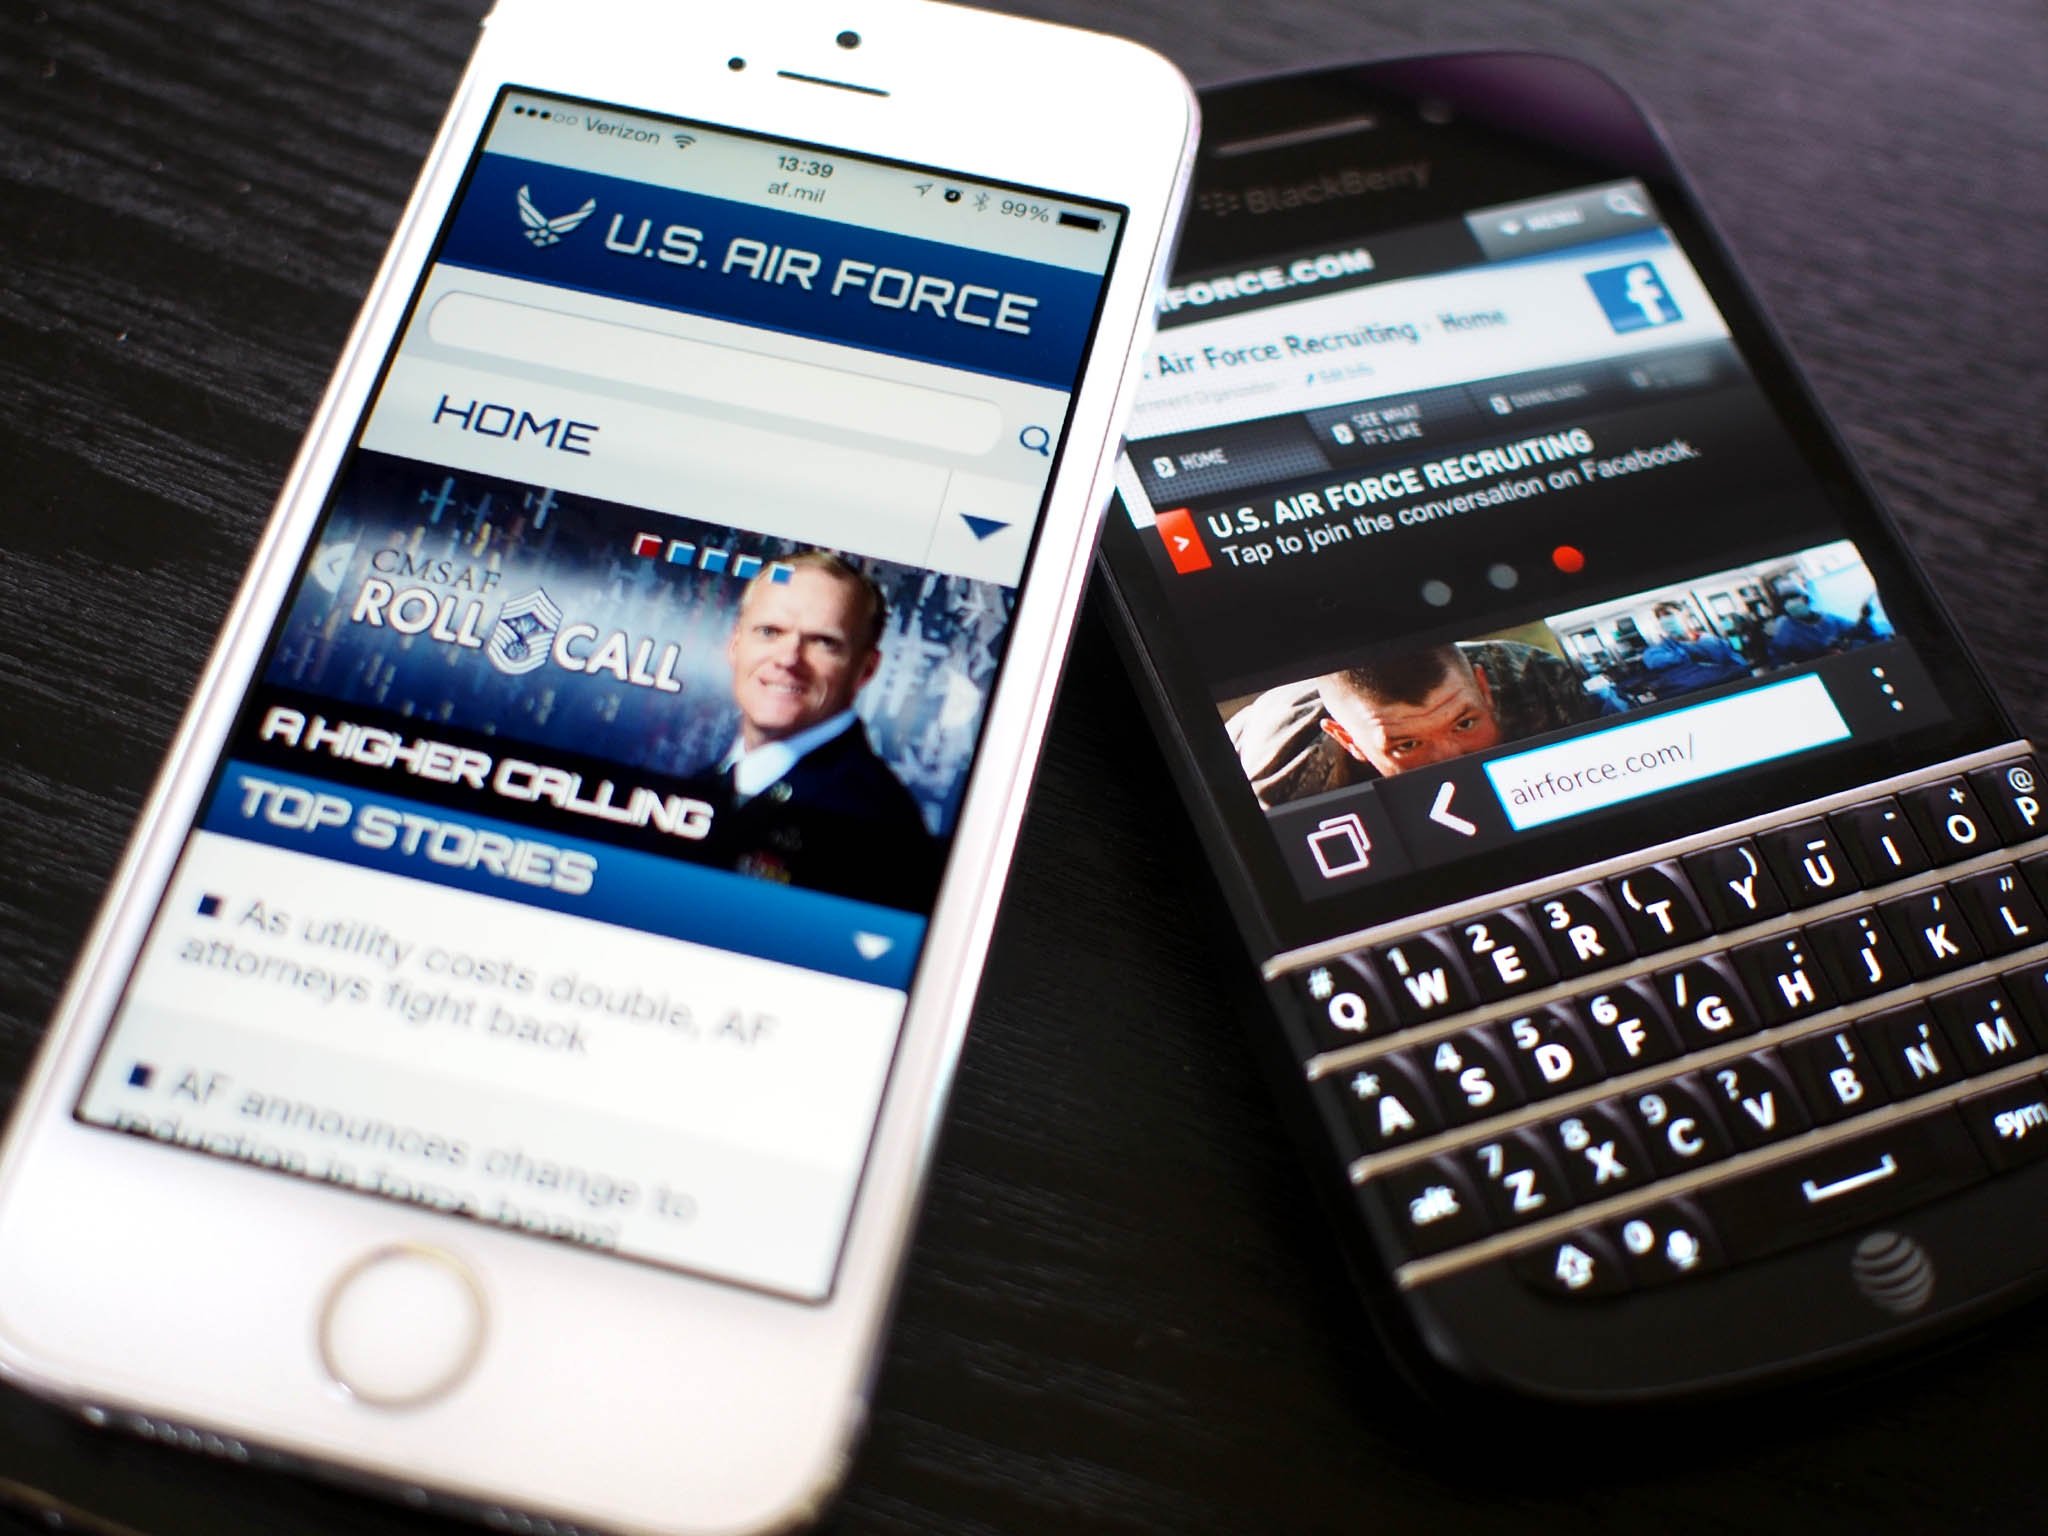 US Air Force begins transition, swapping 5000 BlackBerry devices for iPhones